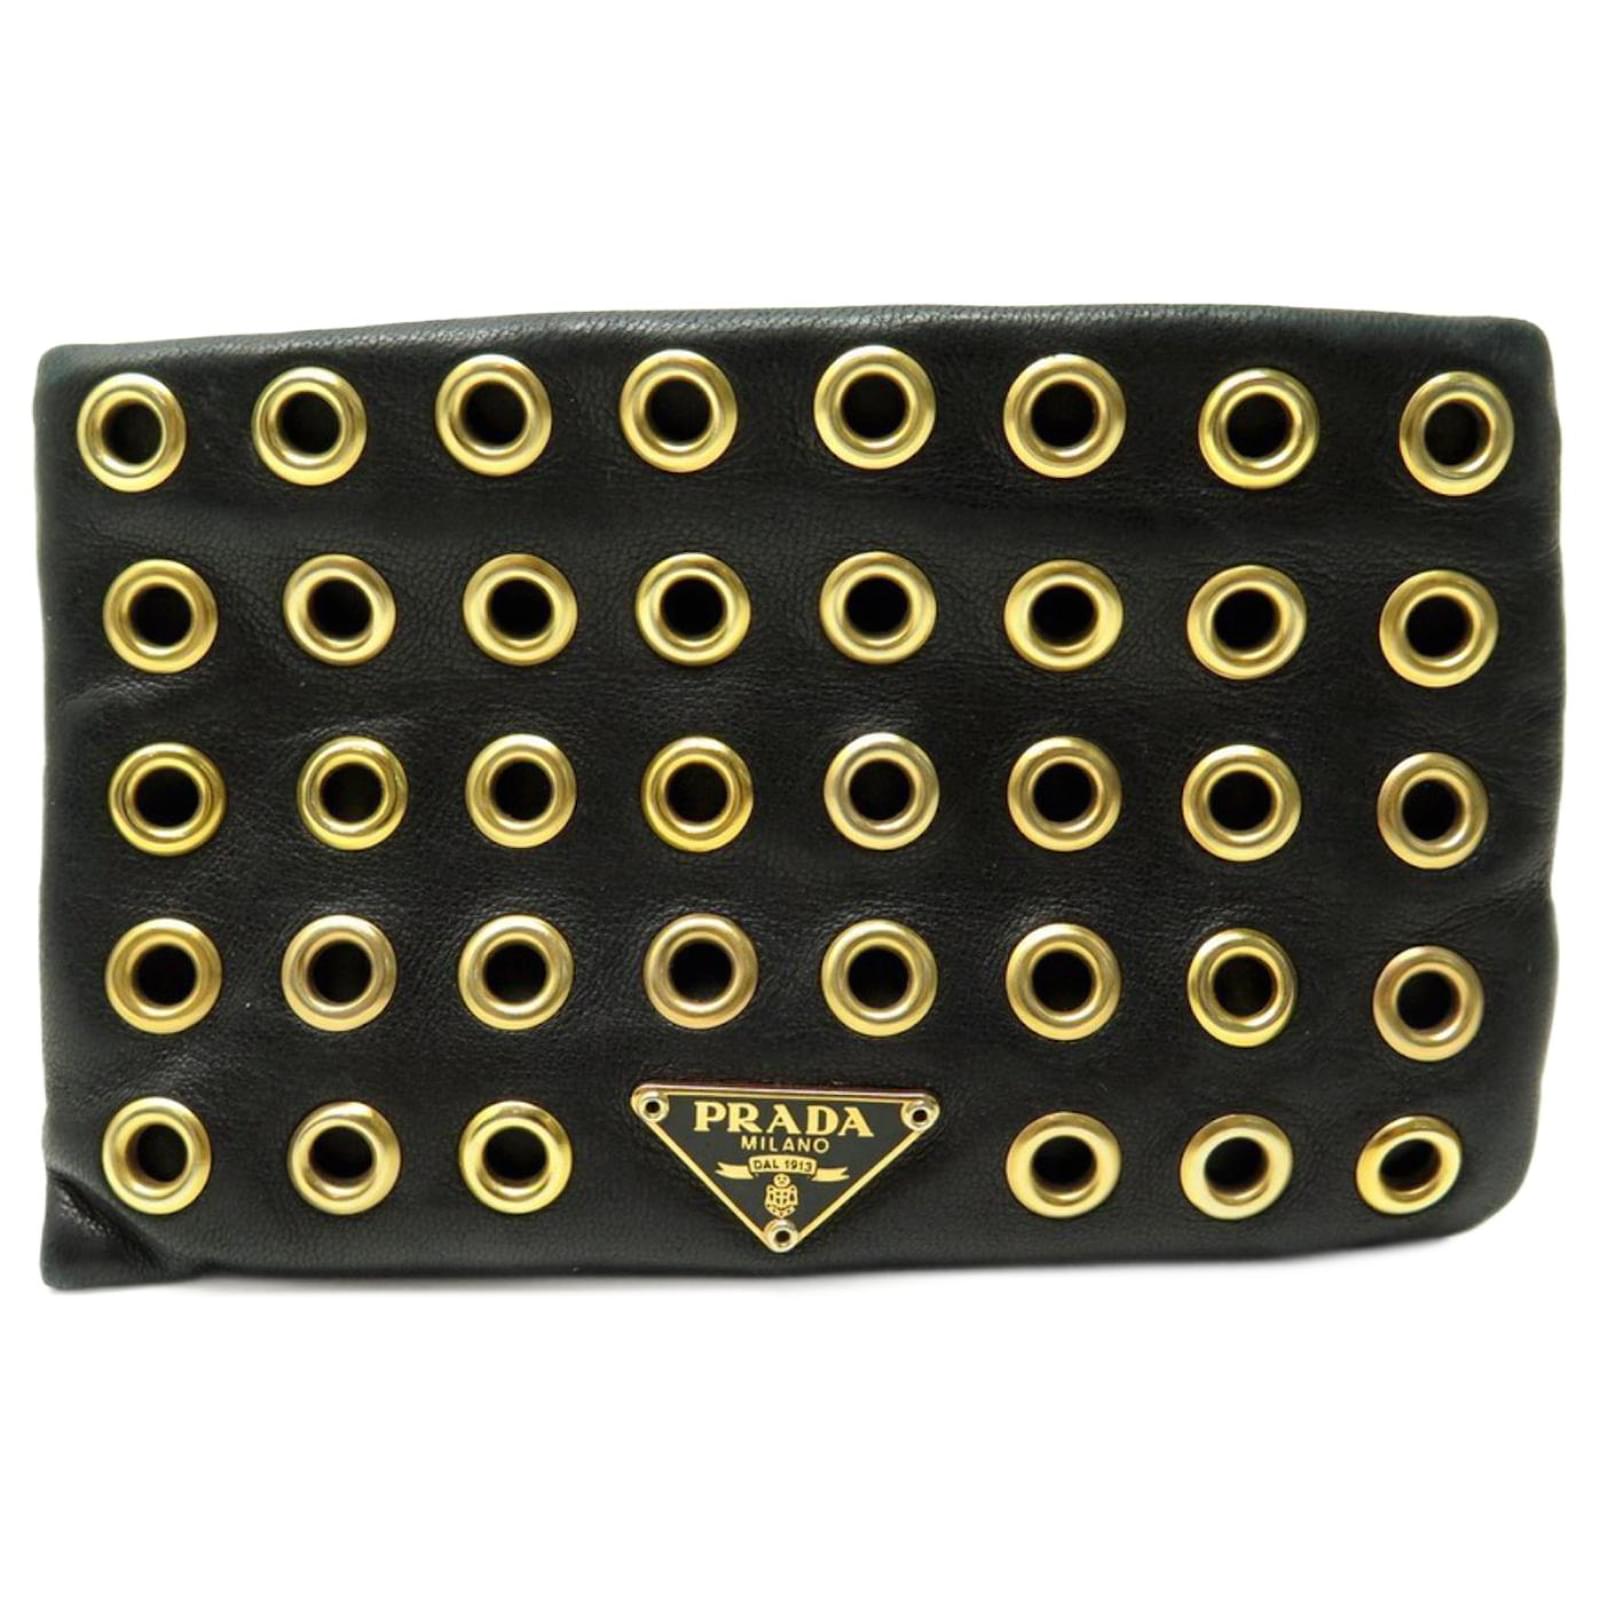 PRADA COIN PURSE IN BLACK LEATHER AND GOLD STUDS EYELET LEATHER POUCH  WALLET  - Joli Closet